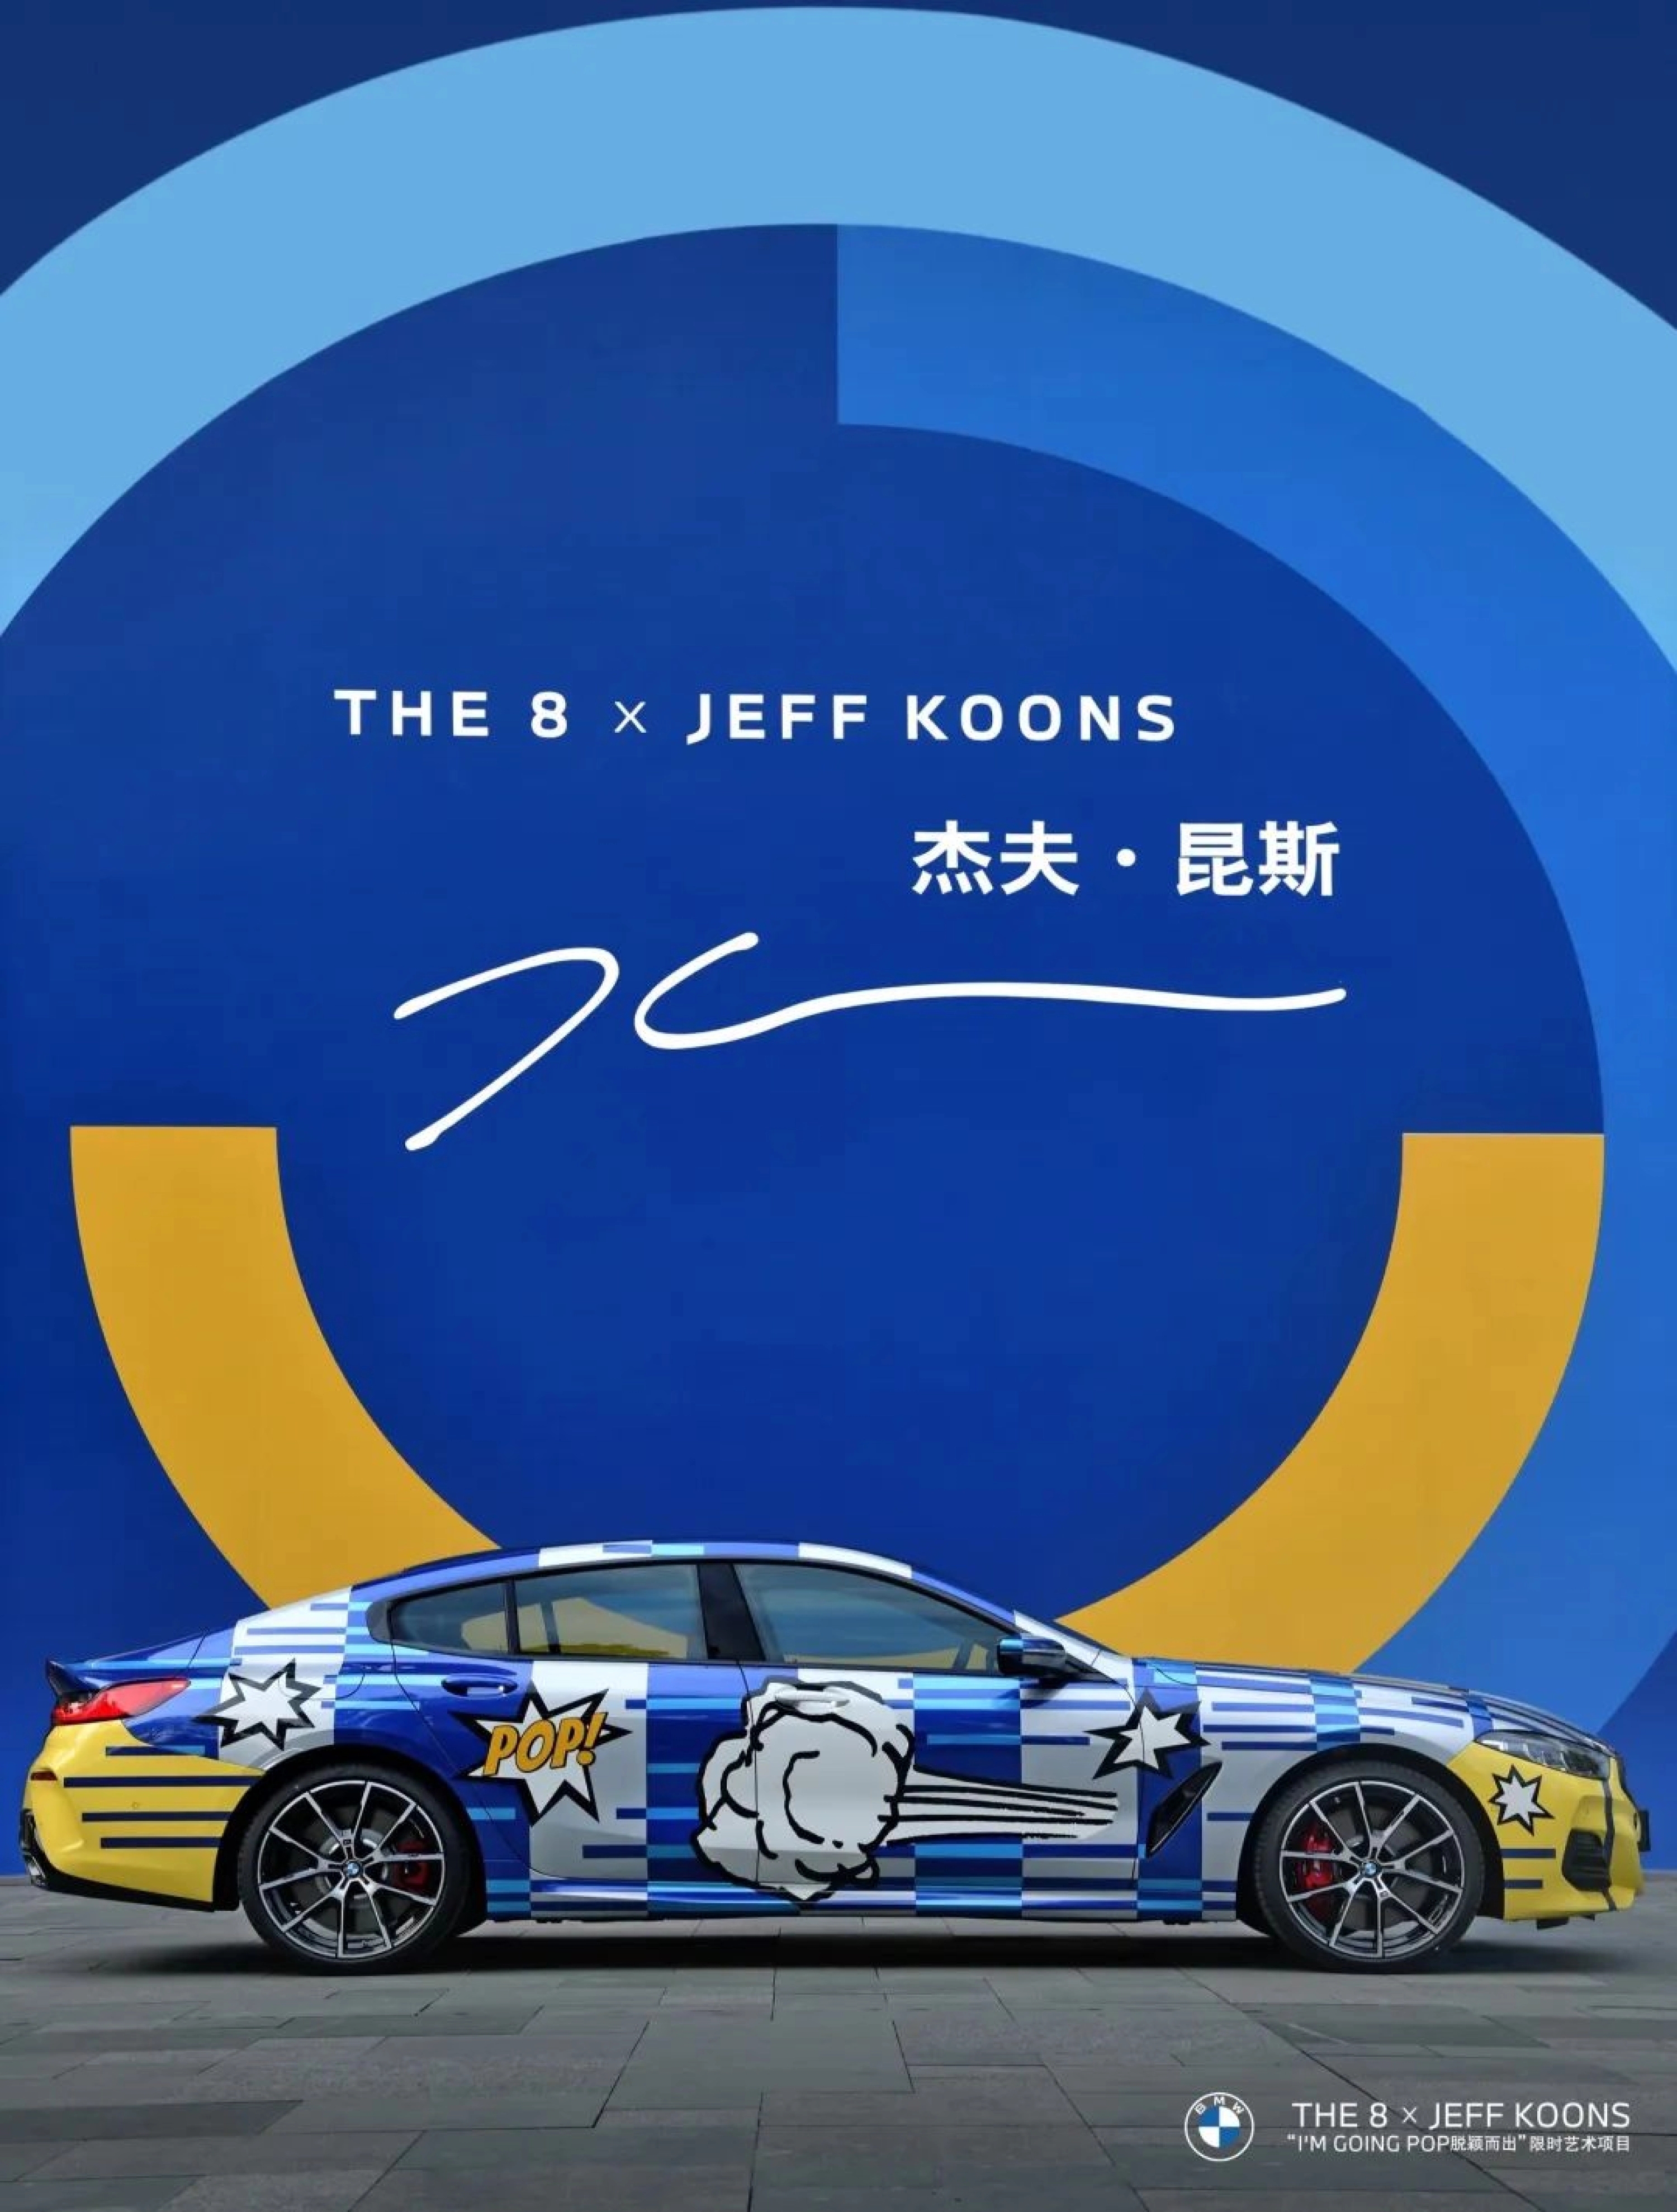 “THE 8 × JEFF KOONS" BMW Limited Edition Collection Appears at Shanghai West Coast Art and Design Expo, with PILLS Responsible for Booth Design